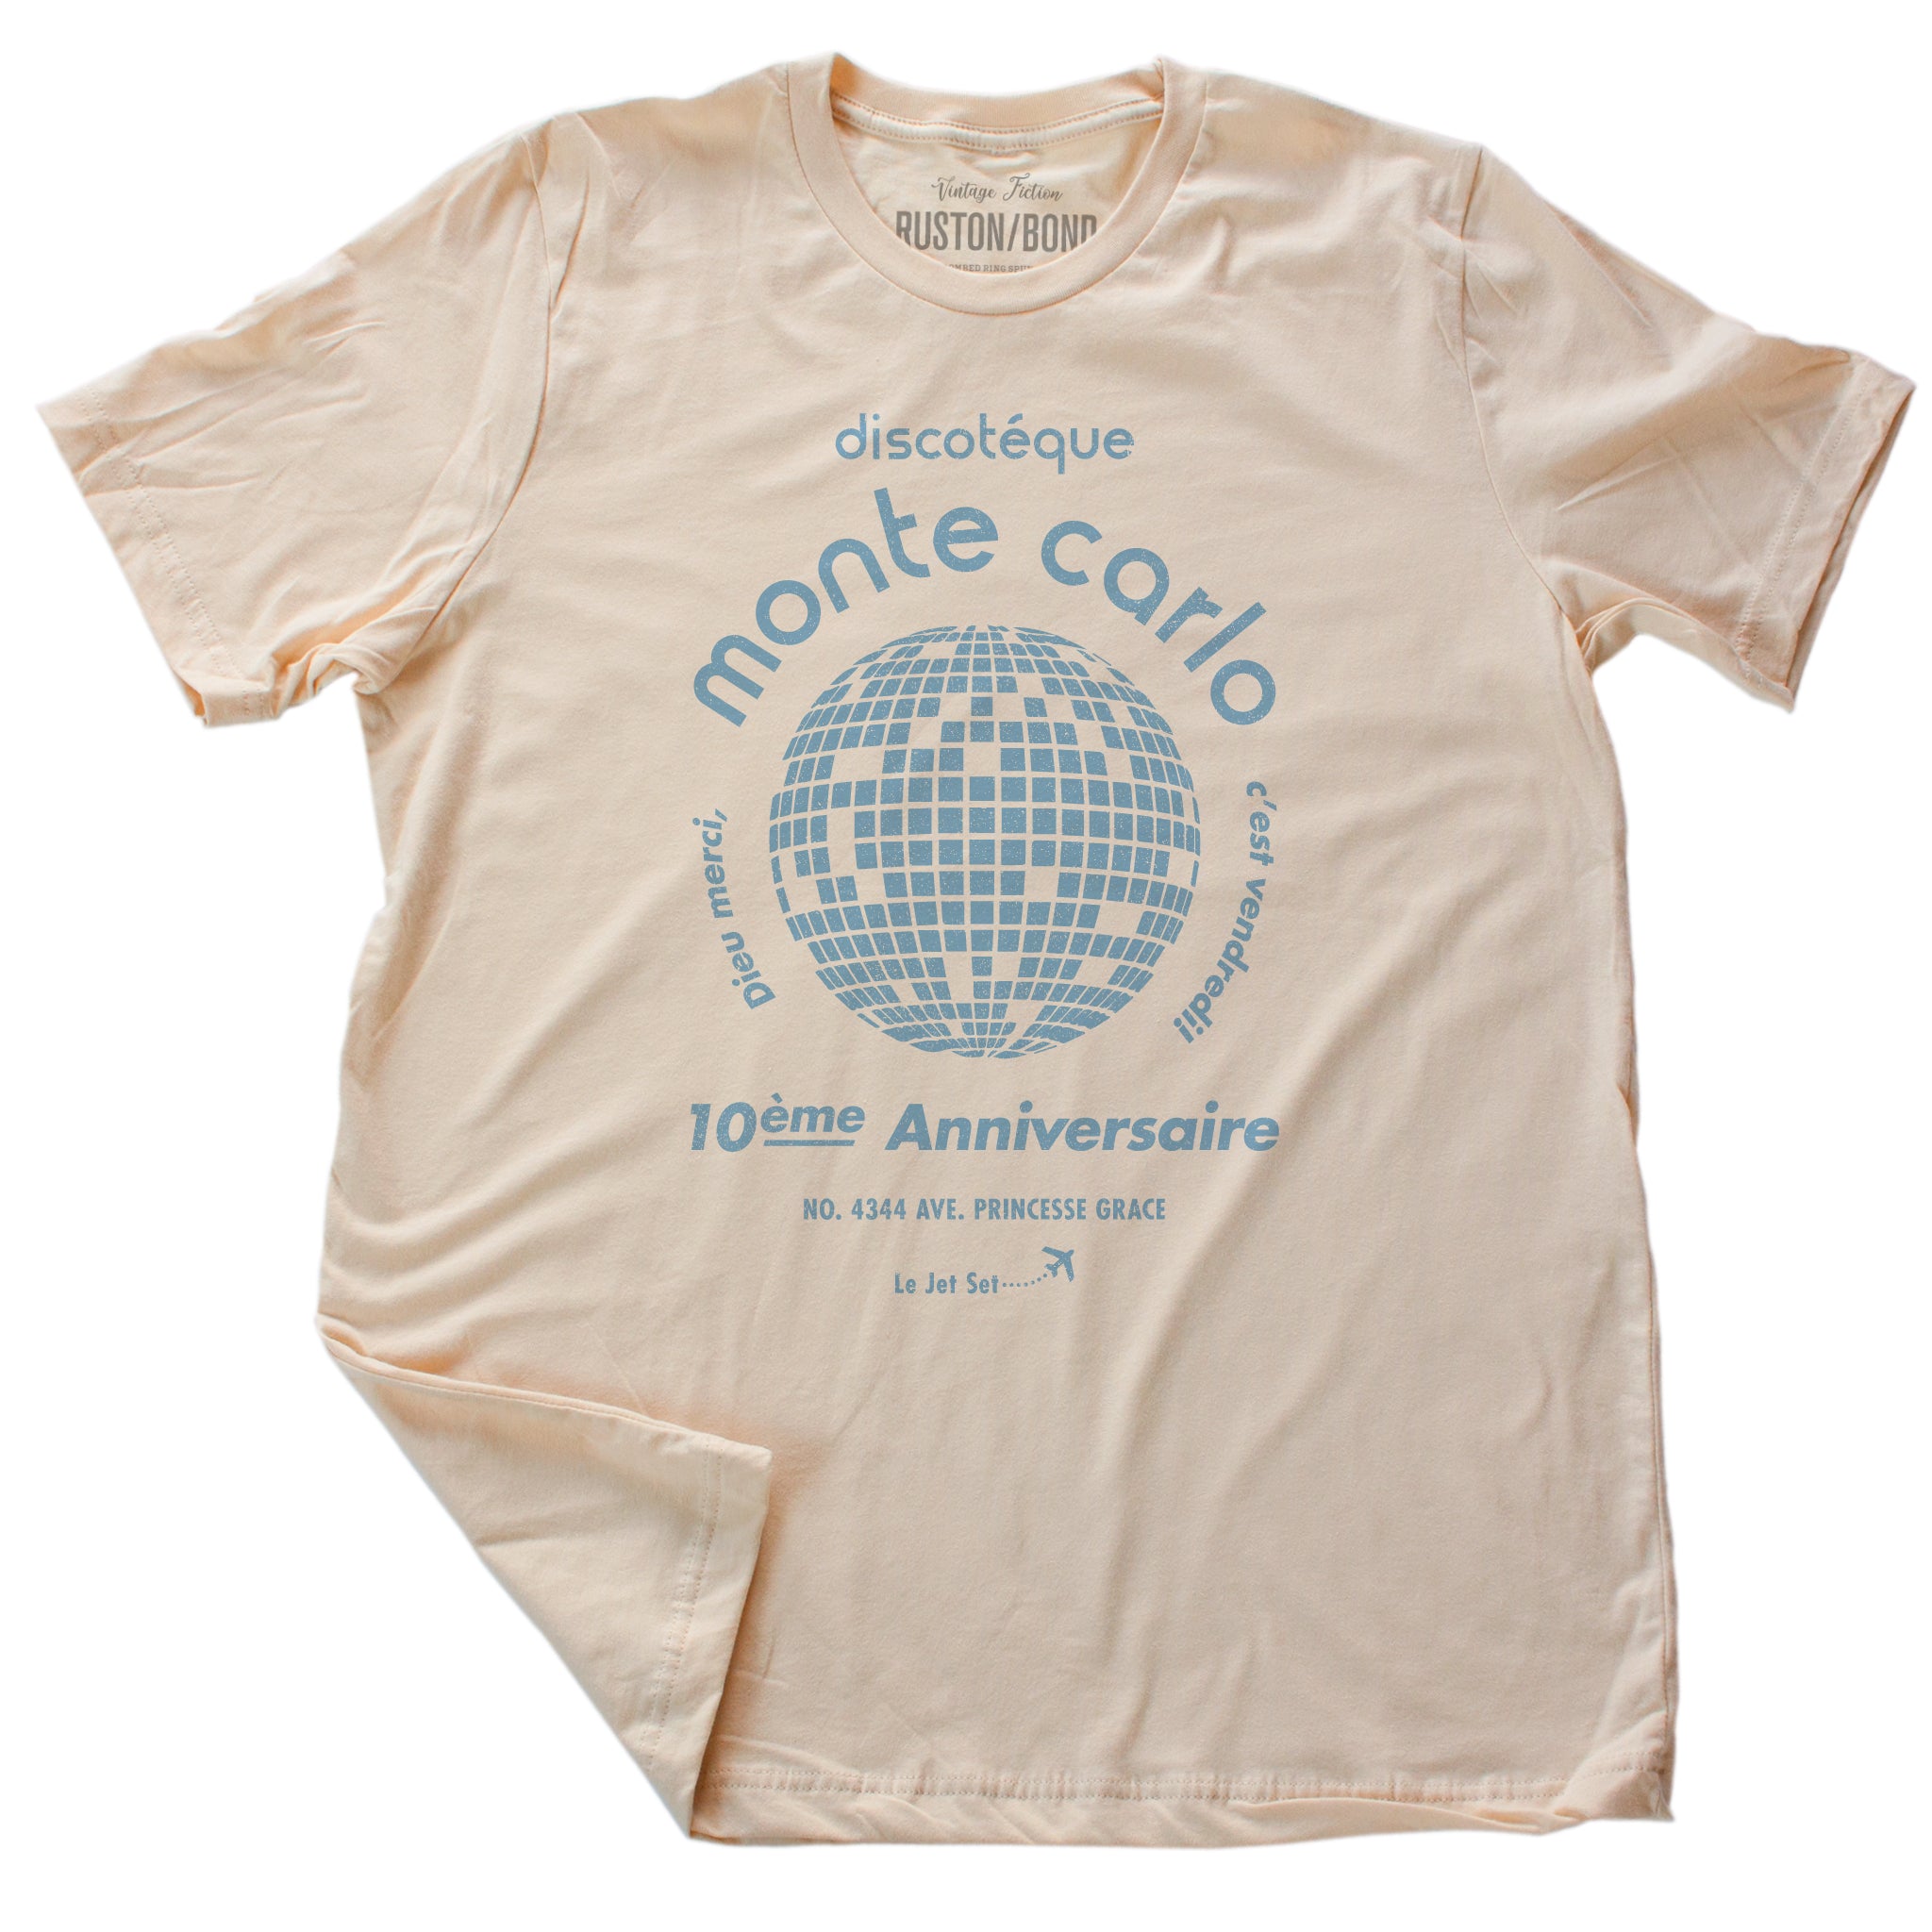 A retro, vintage-inspired t-shirt in Soft Cream, with a disco ball graphic, promoting a fictional Monte Carlo discotheque from the 1970s and 80s. By fashion brand Ruston/Bond, from wolfsaint.net